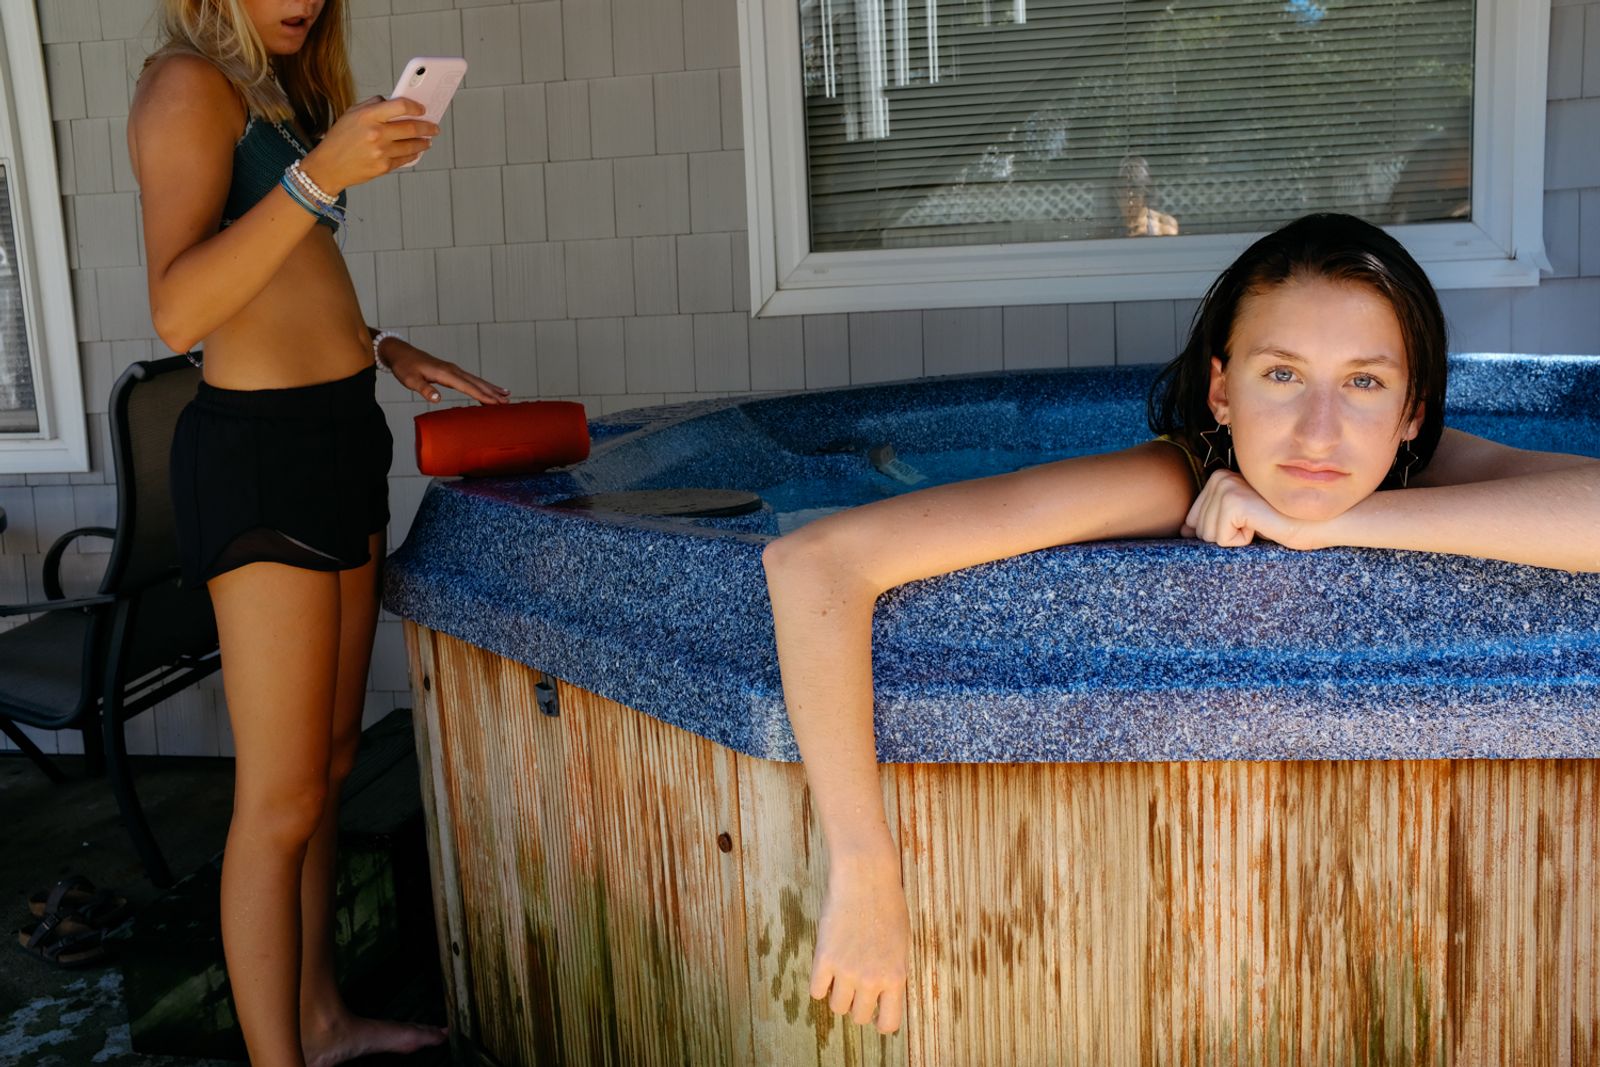 © Angela Ramsey - Anne enjoys the hot tube by herself. This is rare moment in a large family.